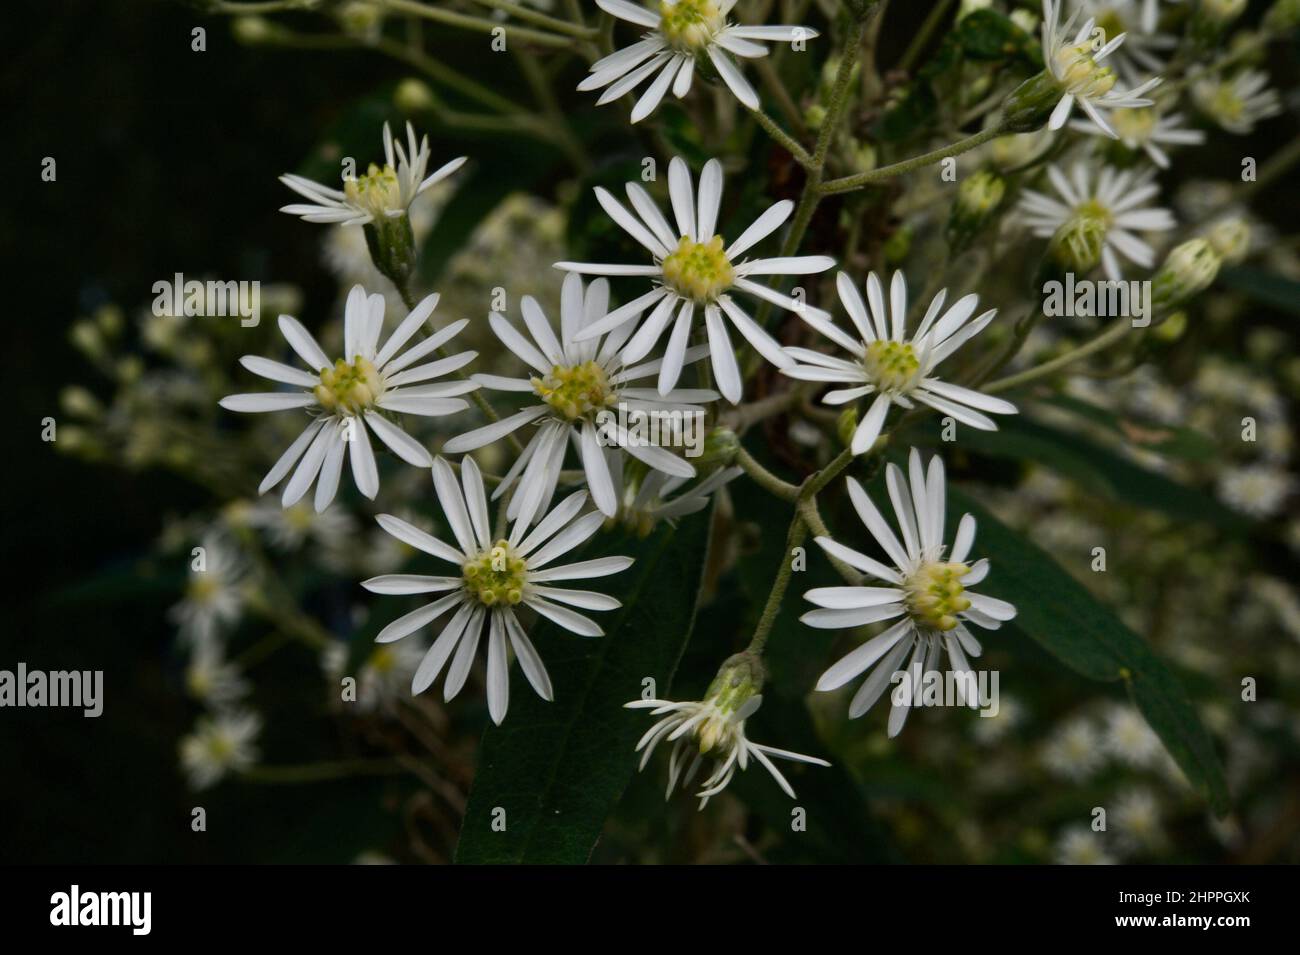 Snowy Daisies (Olearia Lirata) always provide a spectacular display when they flower, at Blackburn Lake Reserve in Victoria, Australia. Stock Photo